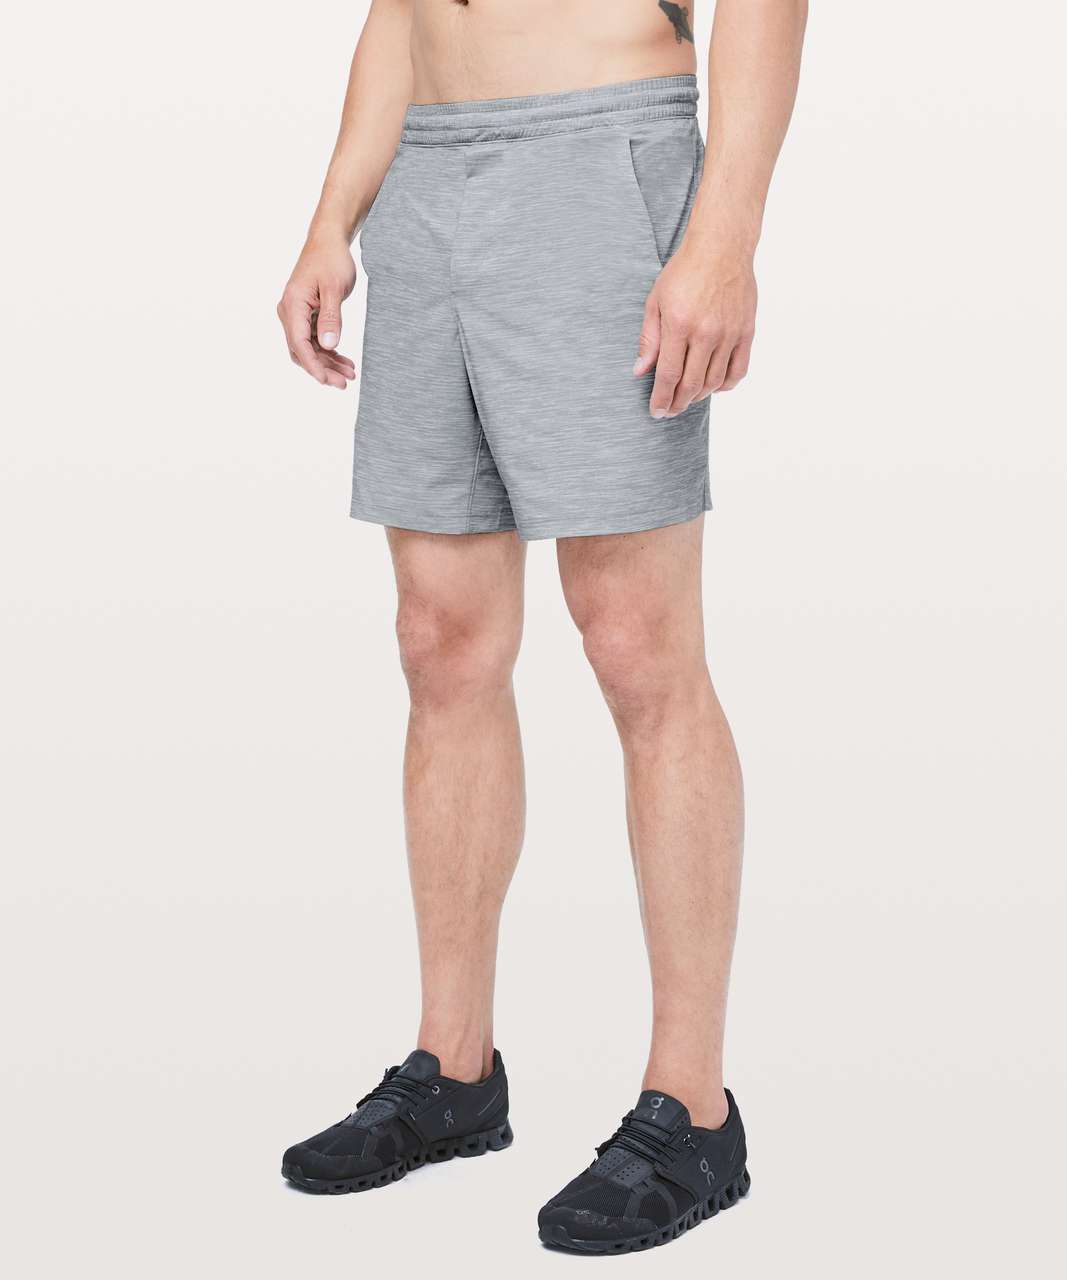 This price difference for the reflective shorts…😳😬 Why are the mens only  $88 ($20 more than regular pace breakers) while the womens are $168 ($100  more than regular hotty hots)?? : r/lululemon